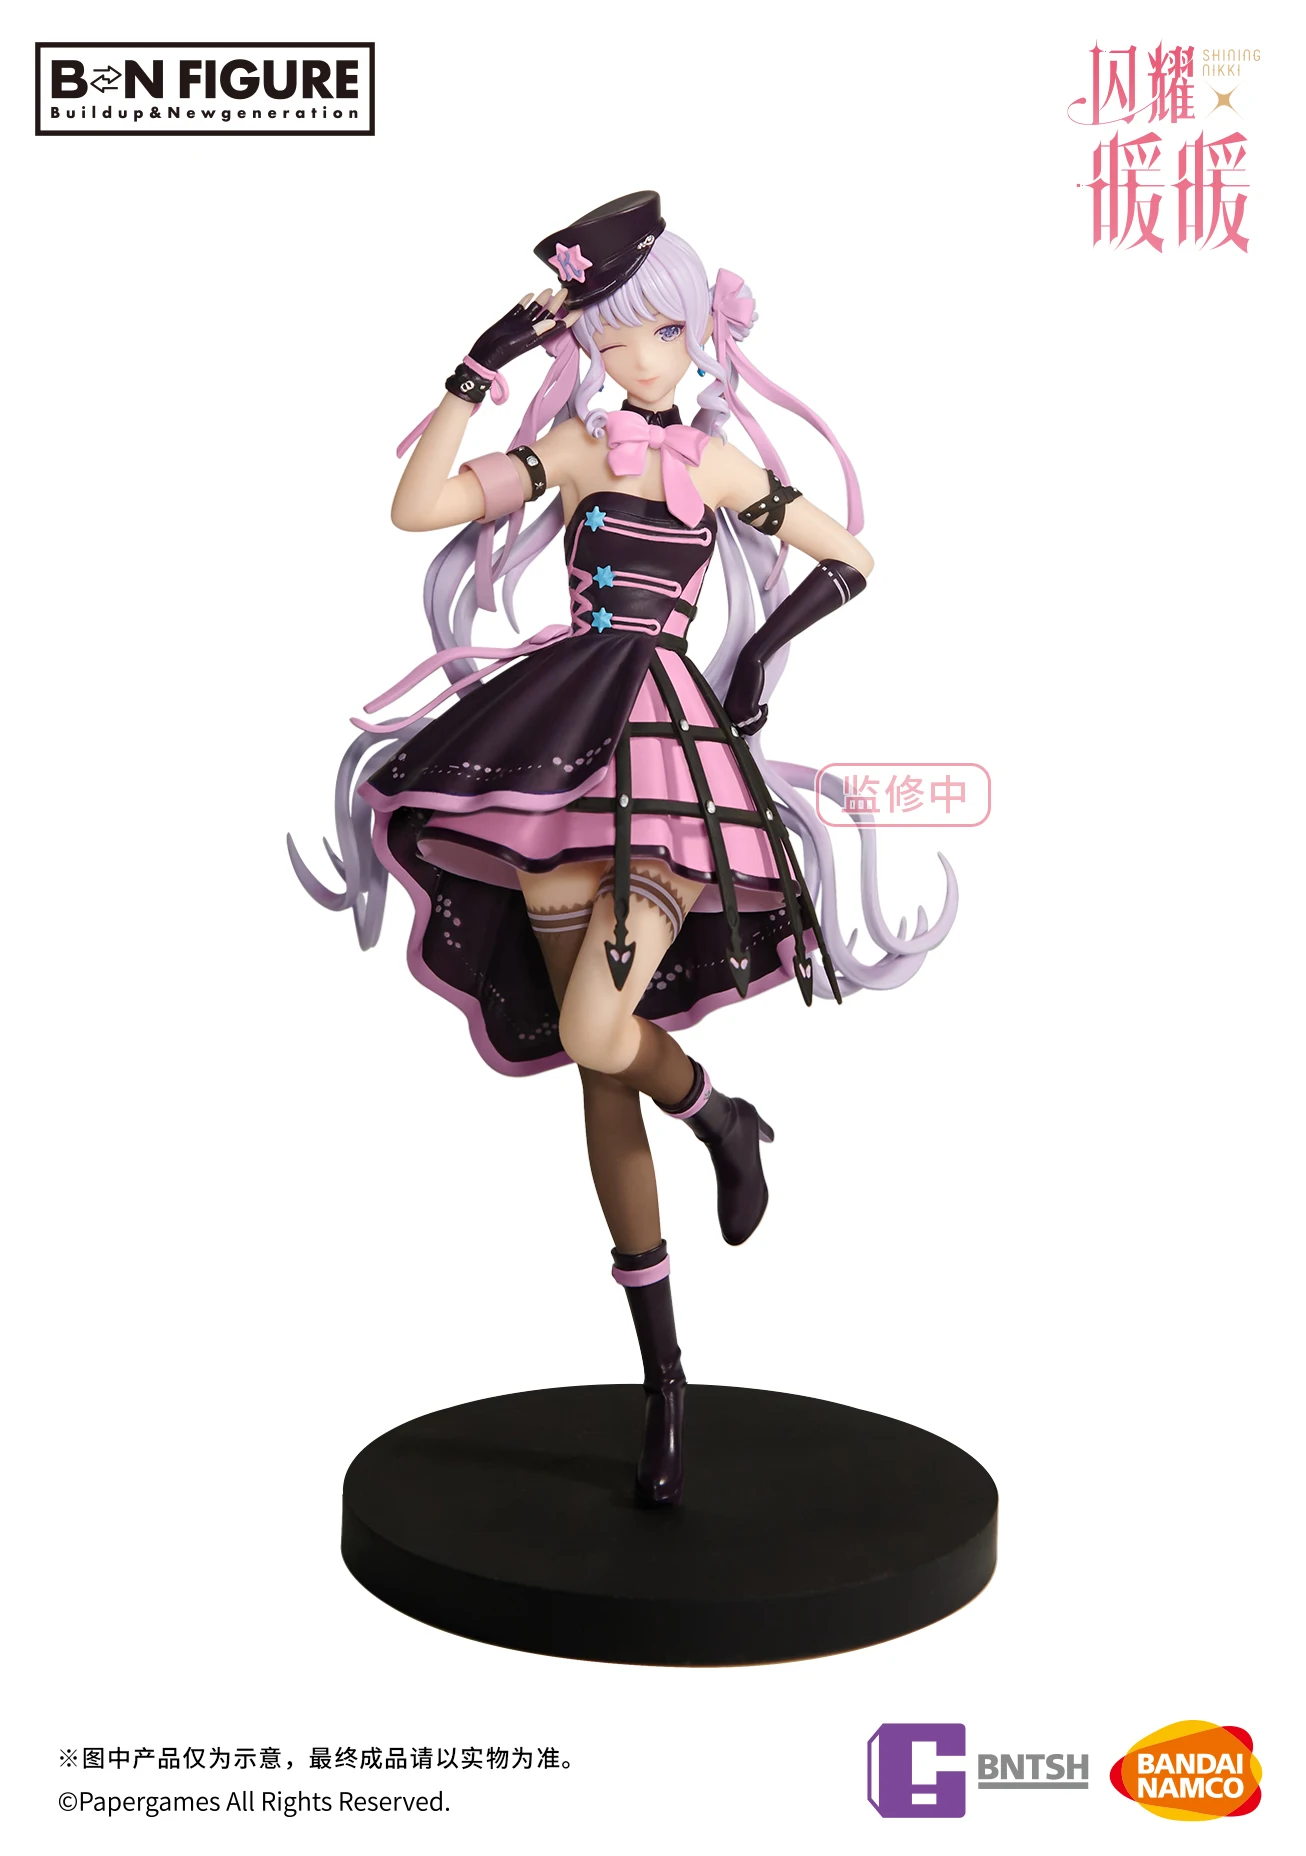 

BANDAI BNTSH Shining and warm Voice of Desire Anime Toys MOdel Figure